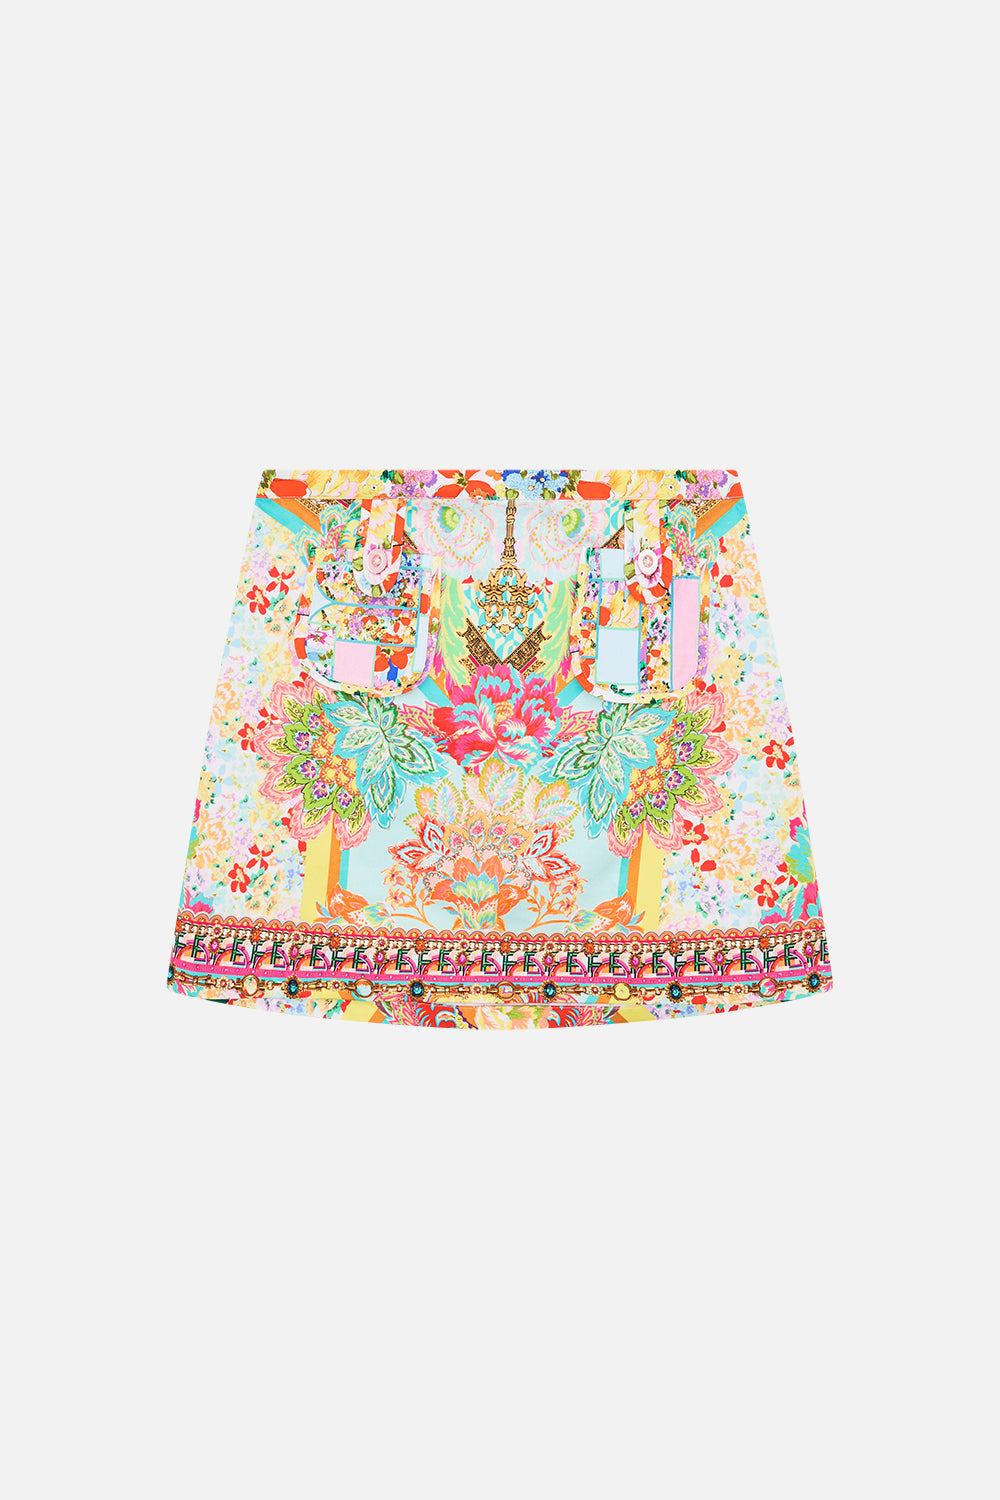 Product view of MILLA BY CAMILLA kids mini skirt with pockets in An Italian Welcome print 